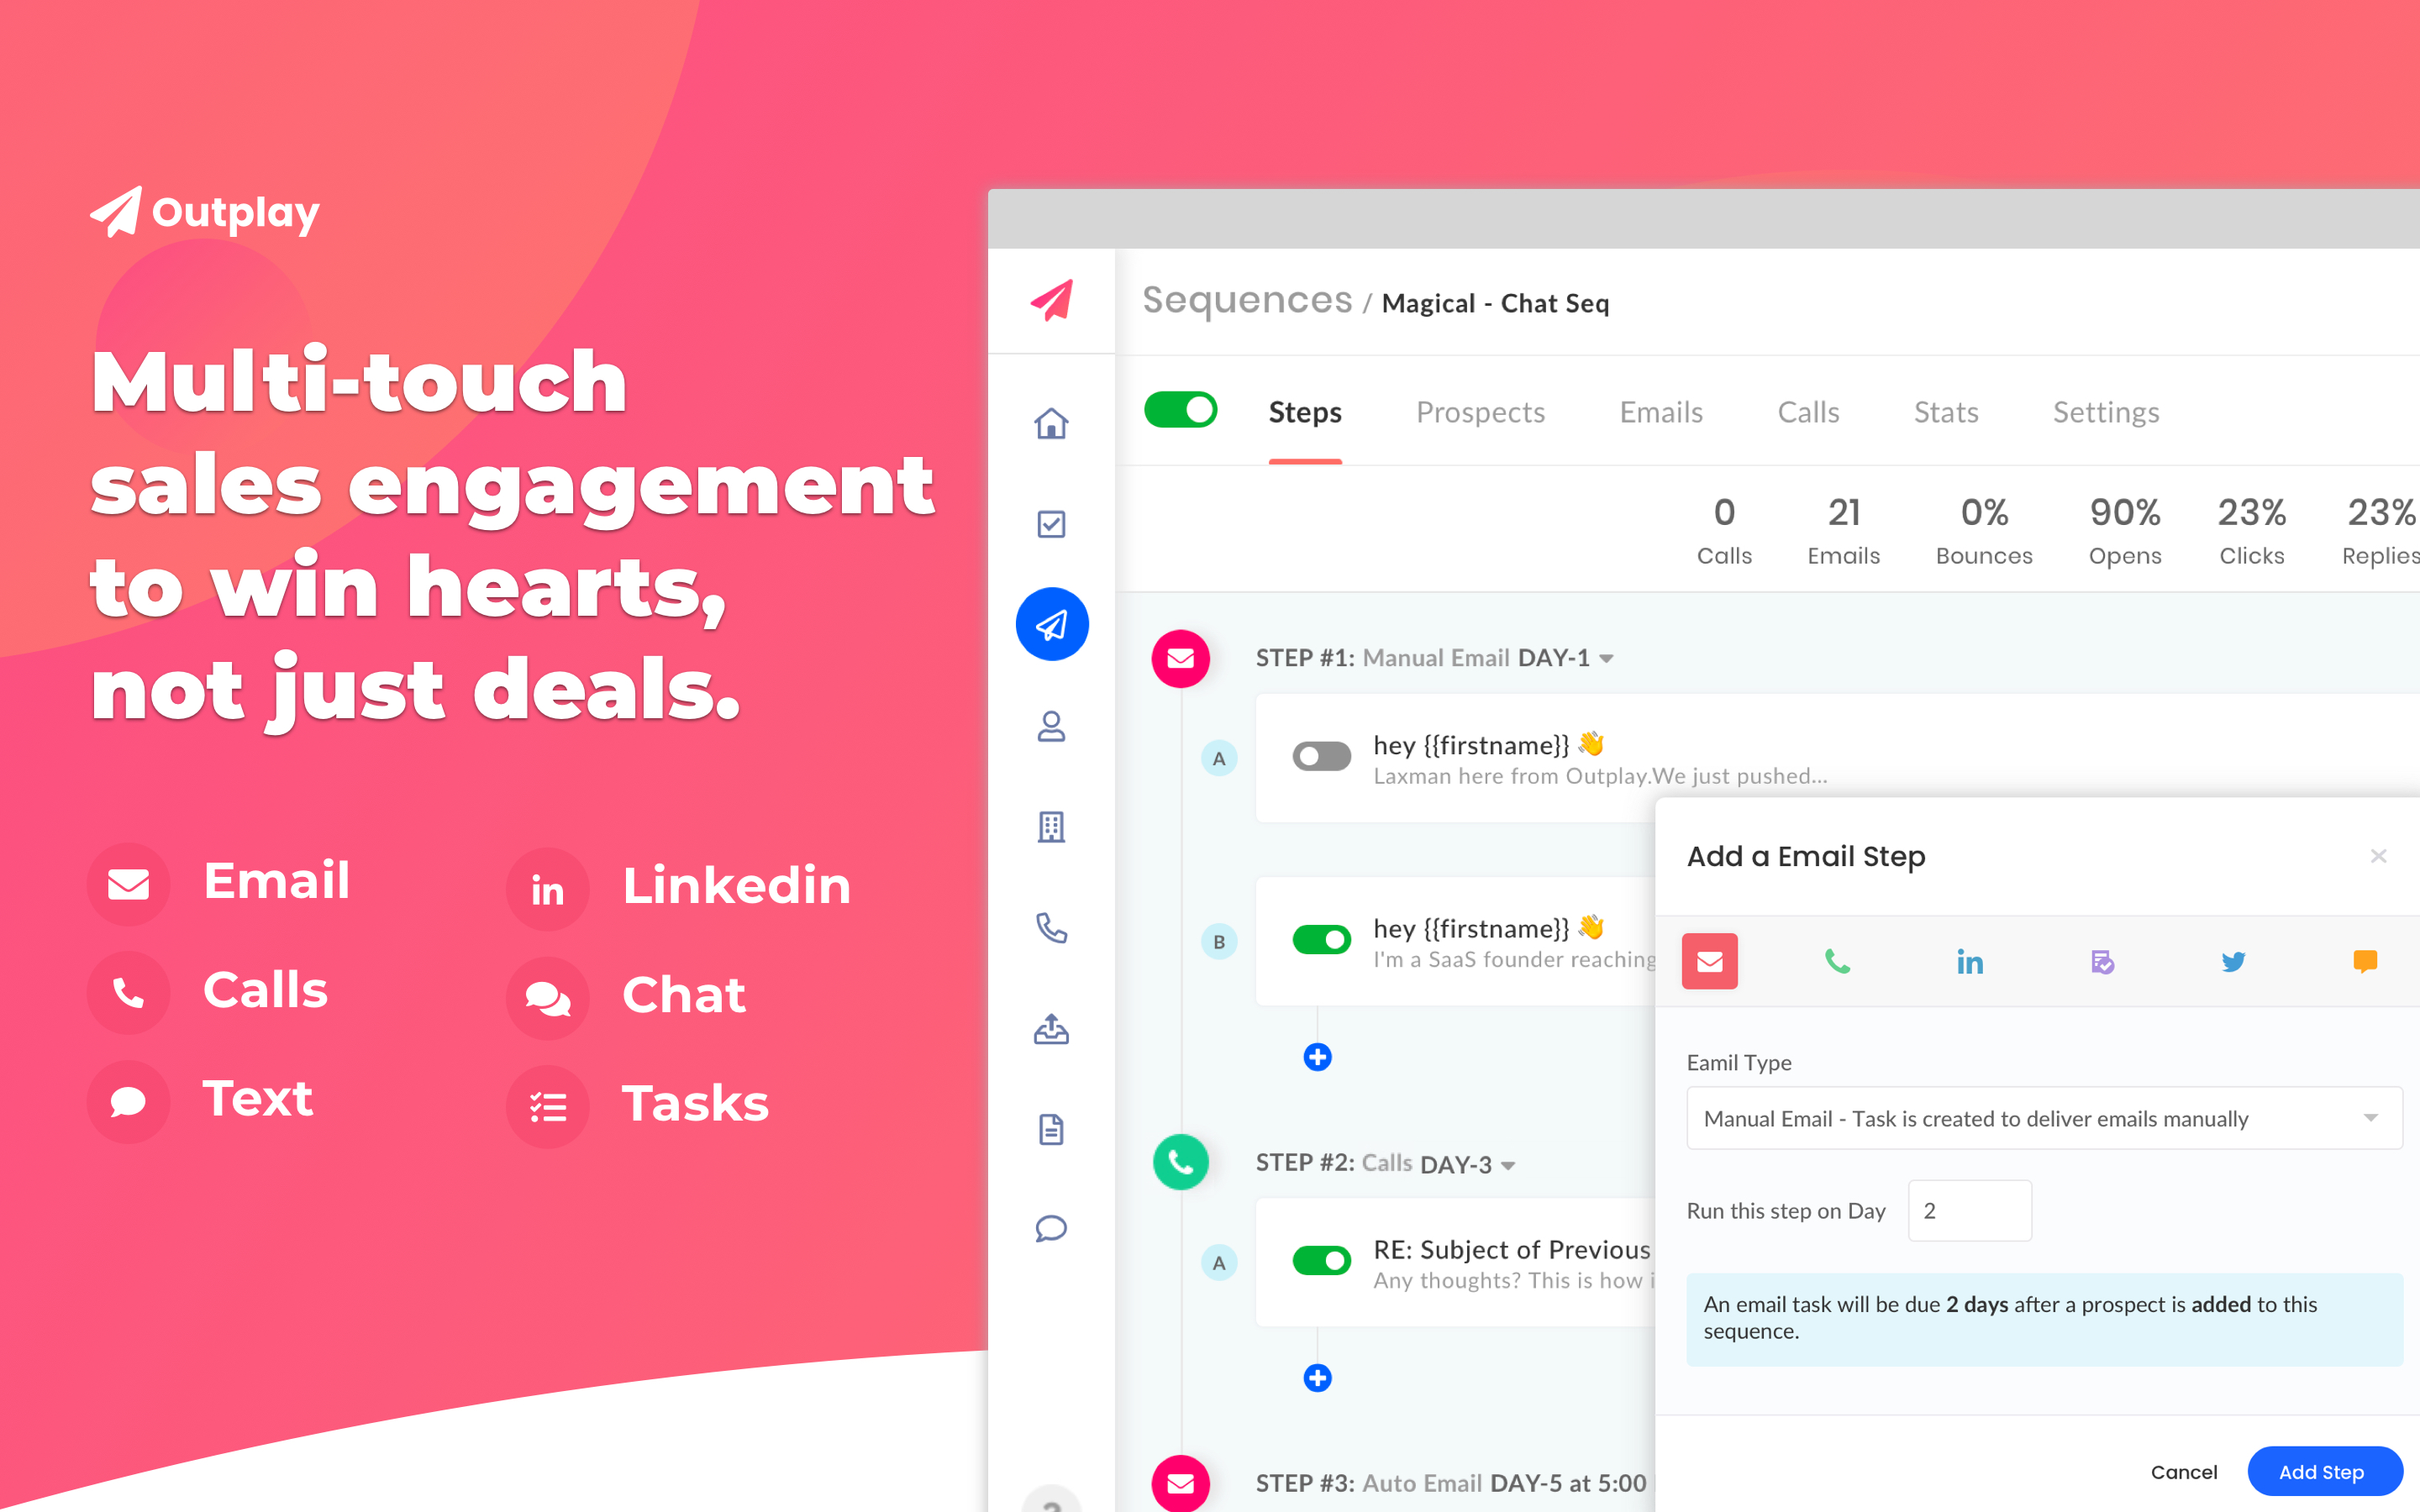 Screenshots of Outplay's sales engagement platform for automating sales tasks